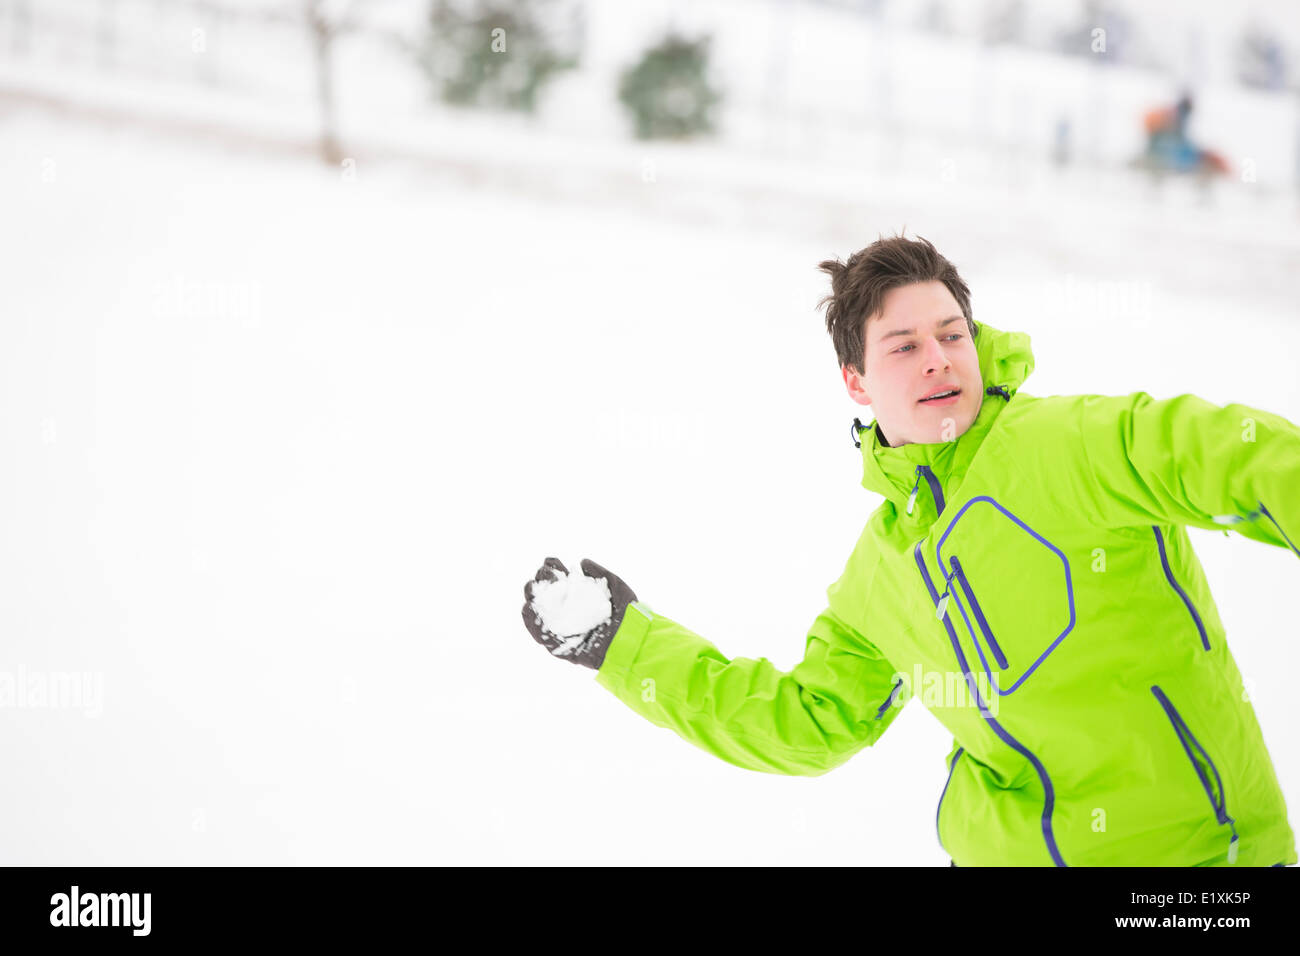 Young man in hooded jacket throwing snowball Stock Photo